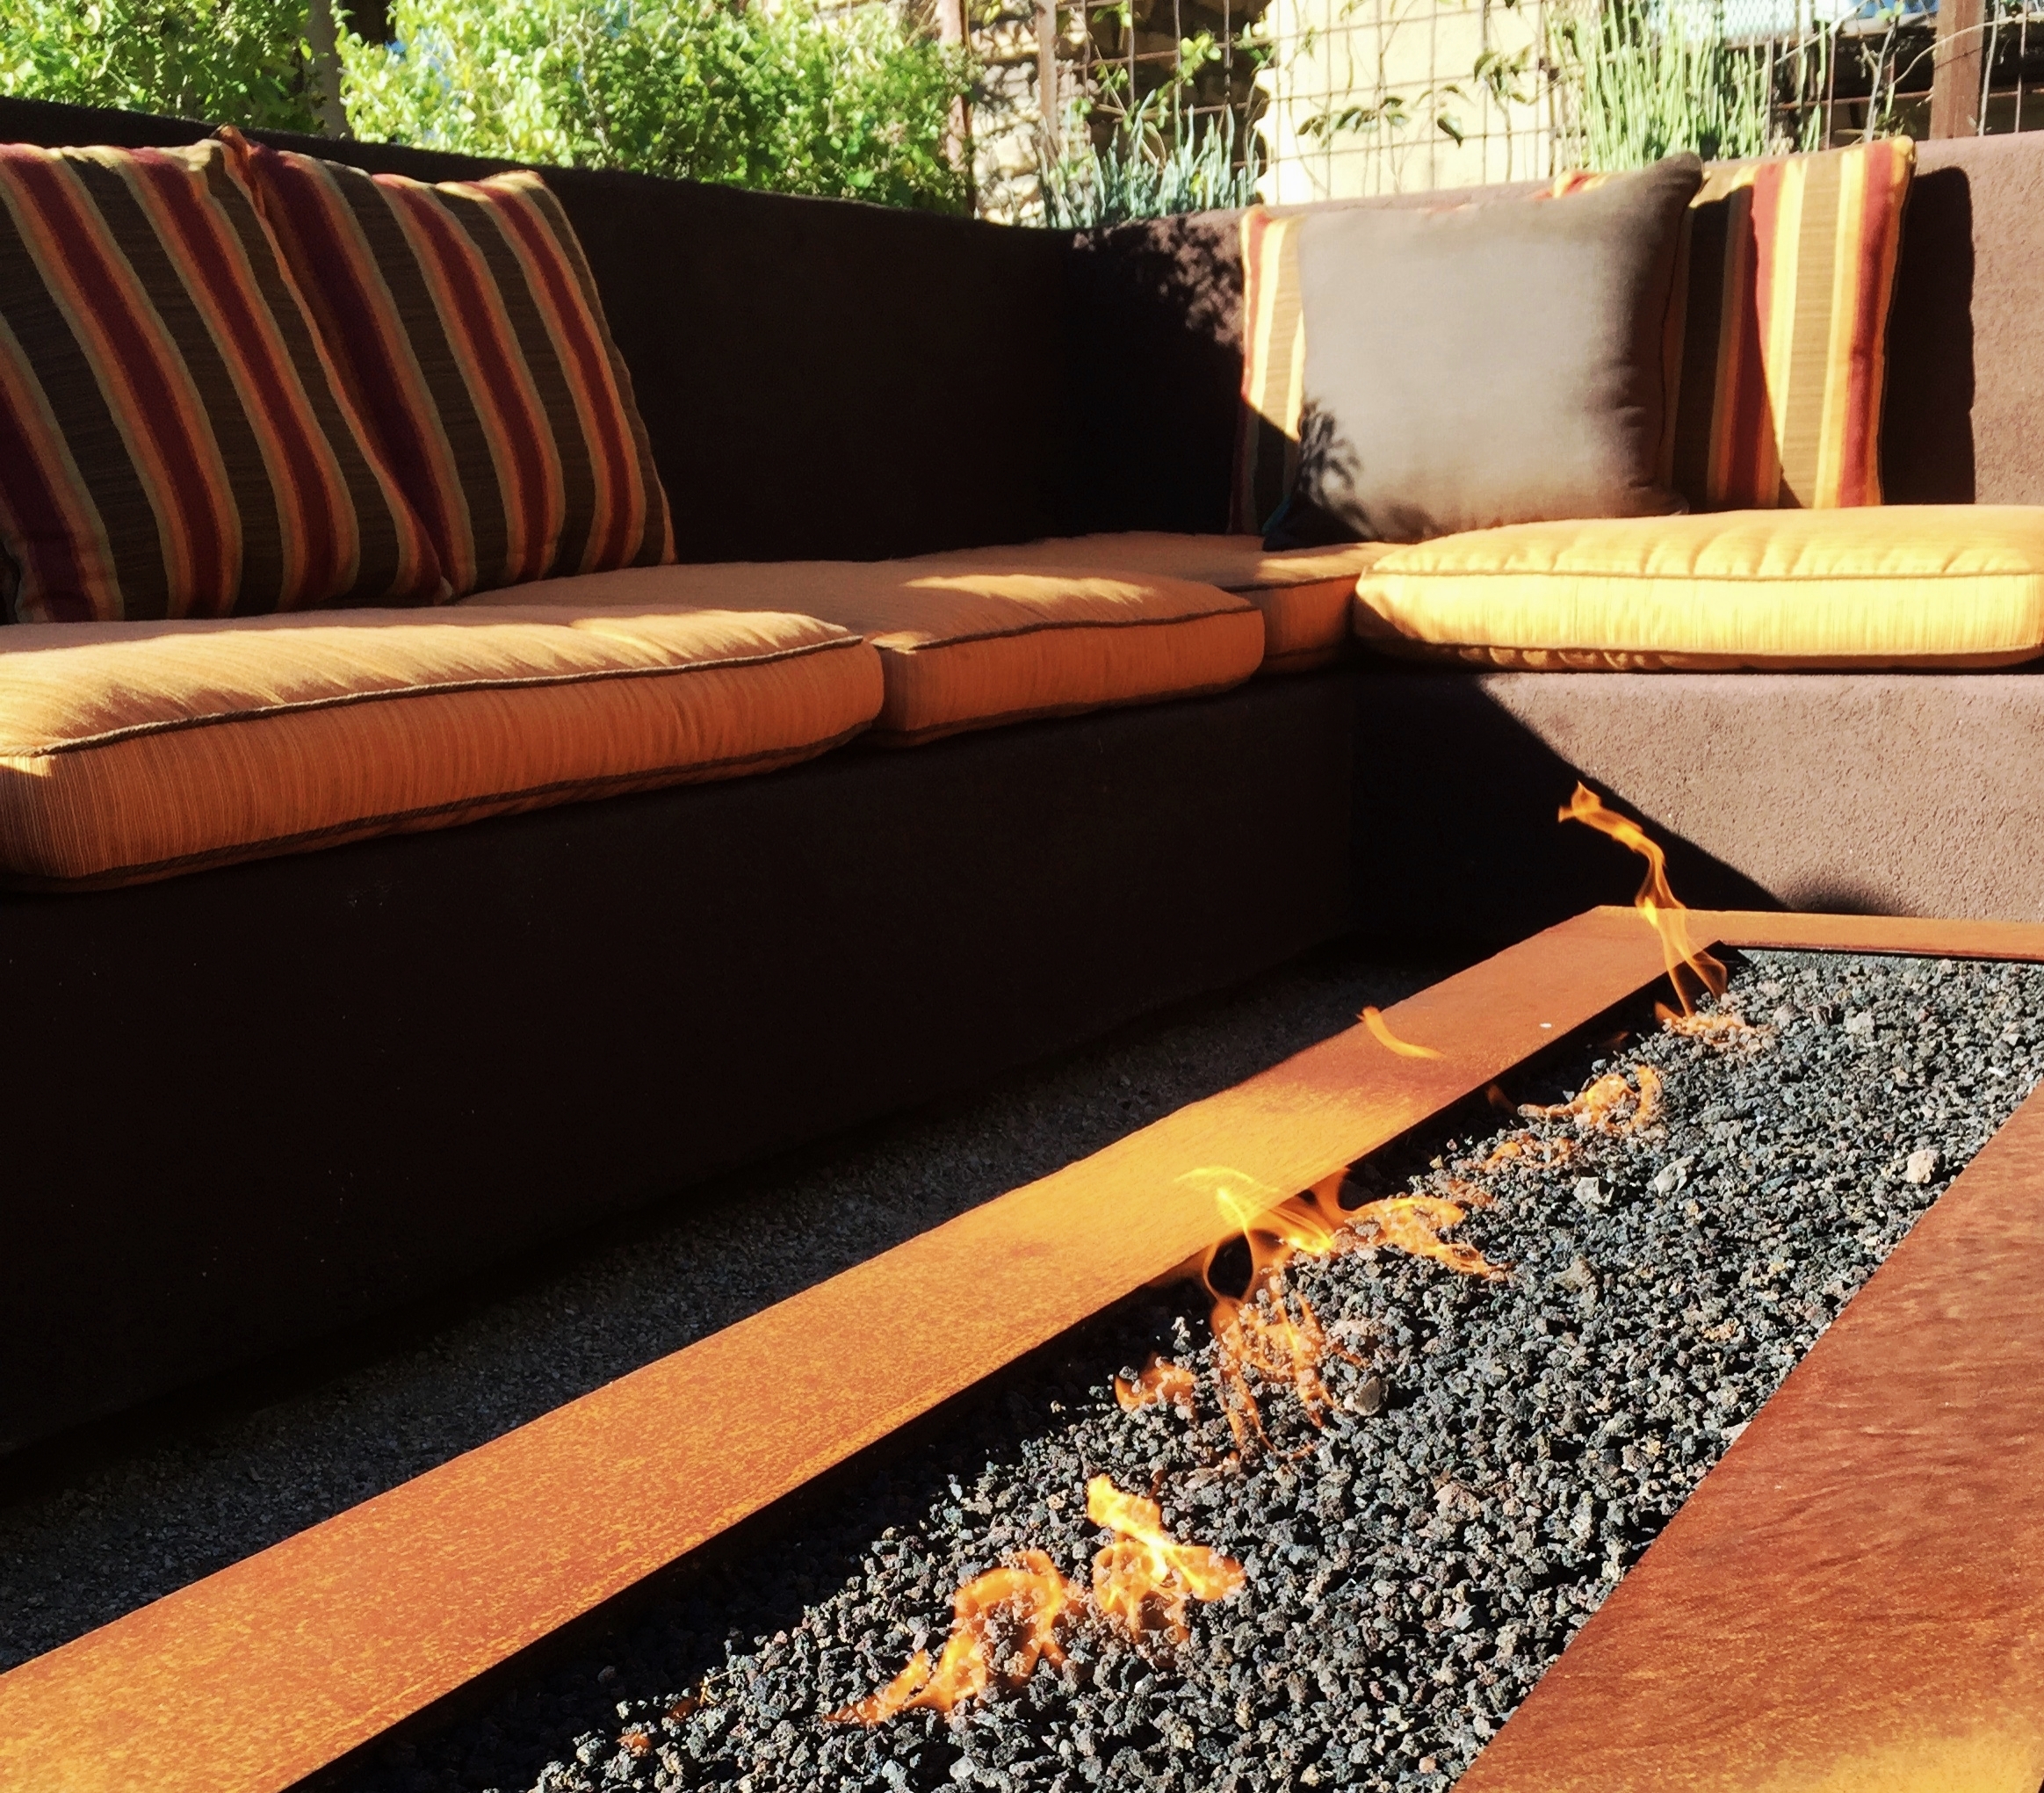 Metal fire feature surrounded by built-in banco seating.